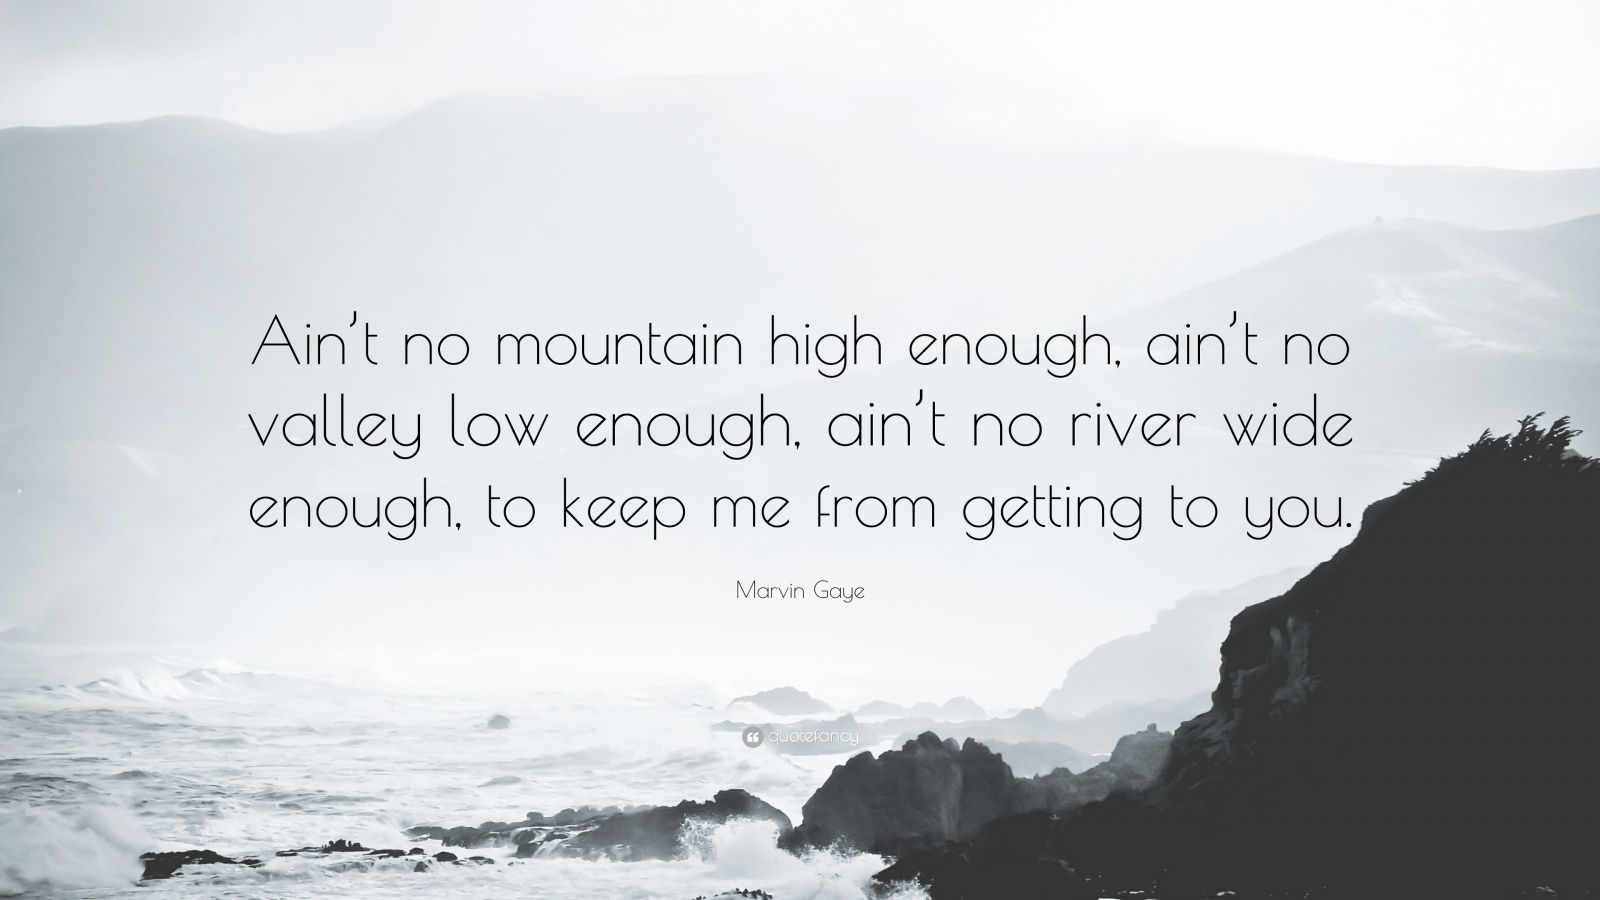 Marvin Gaye Quote: "Ain't no mountain high enough, ain't no valley low enough, ain't no river ...